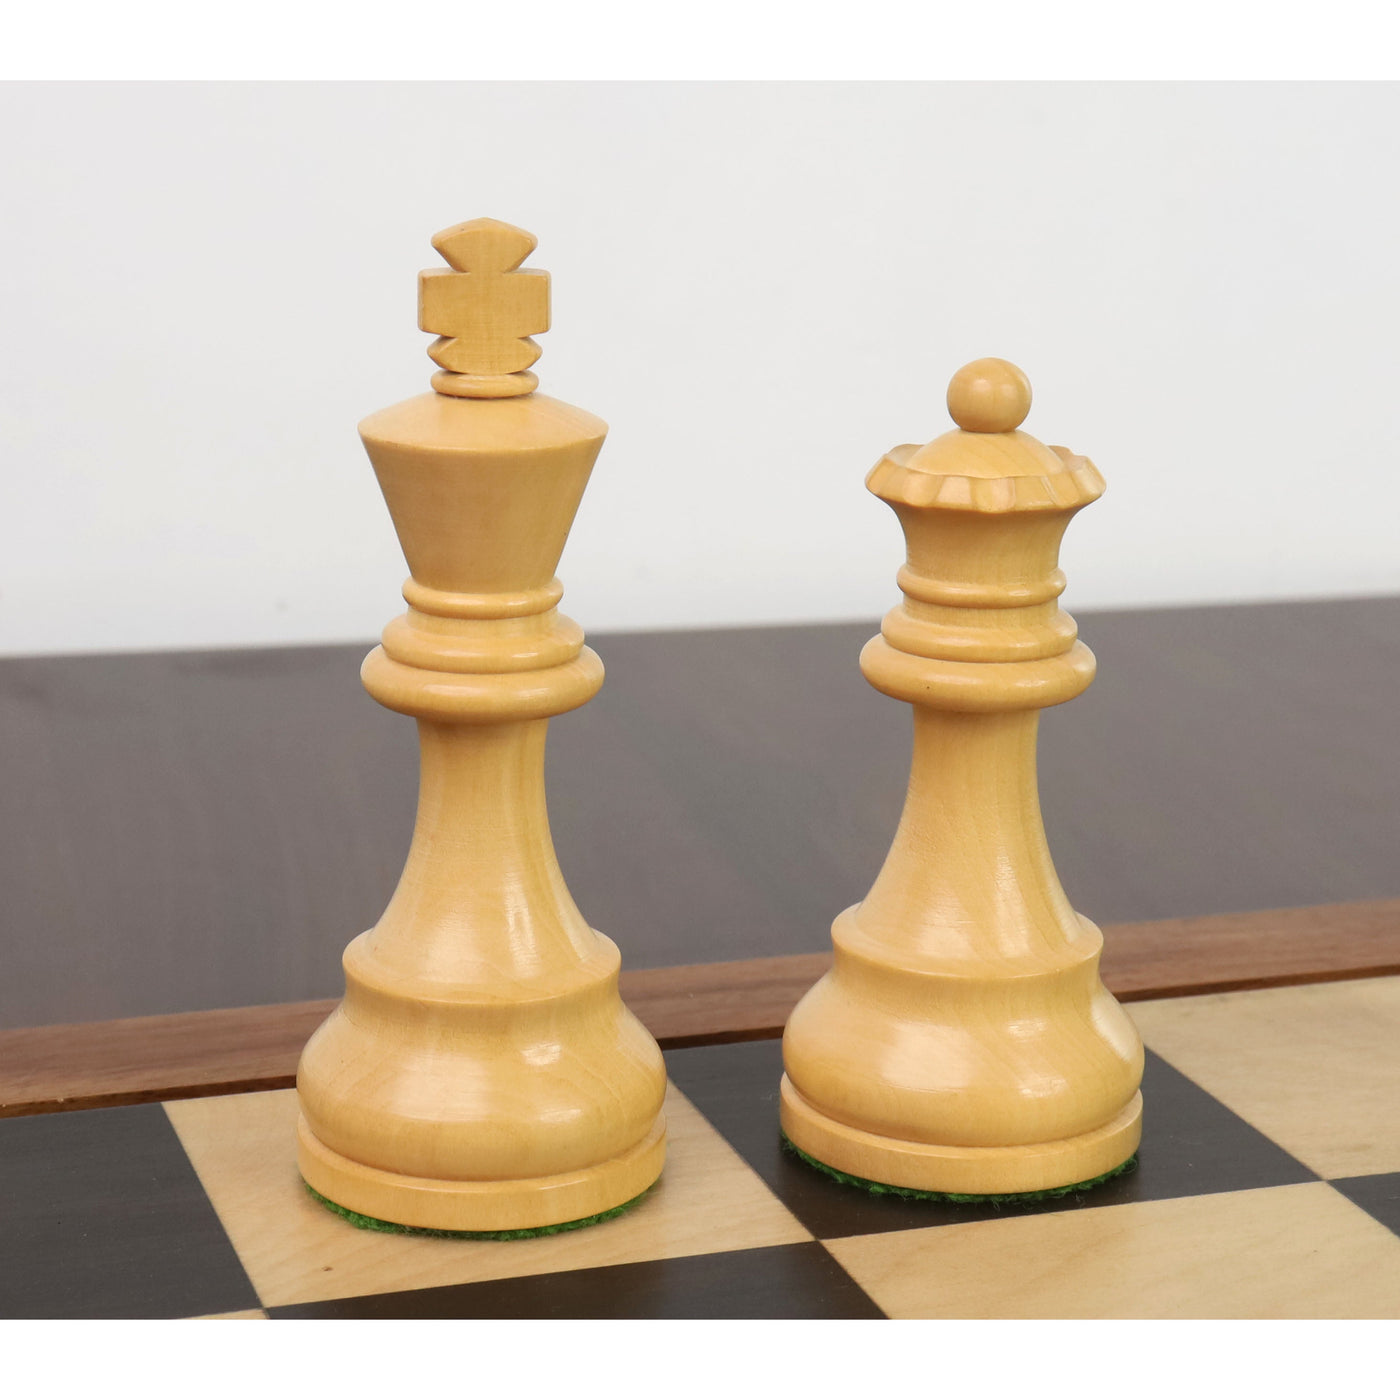 Reproduced French Lardy Staunton Chess Set - Chess Pieces Only - Weighted Wood - 4 Queens